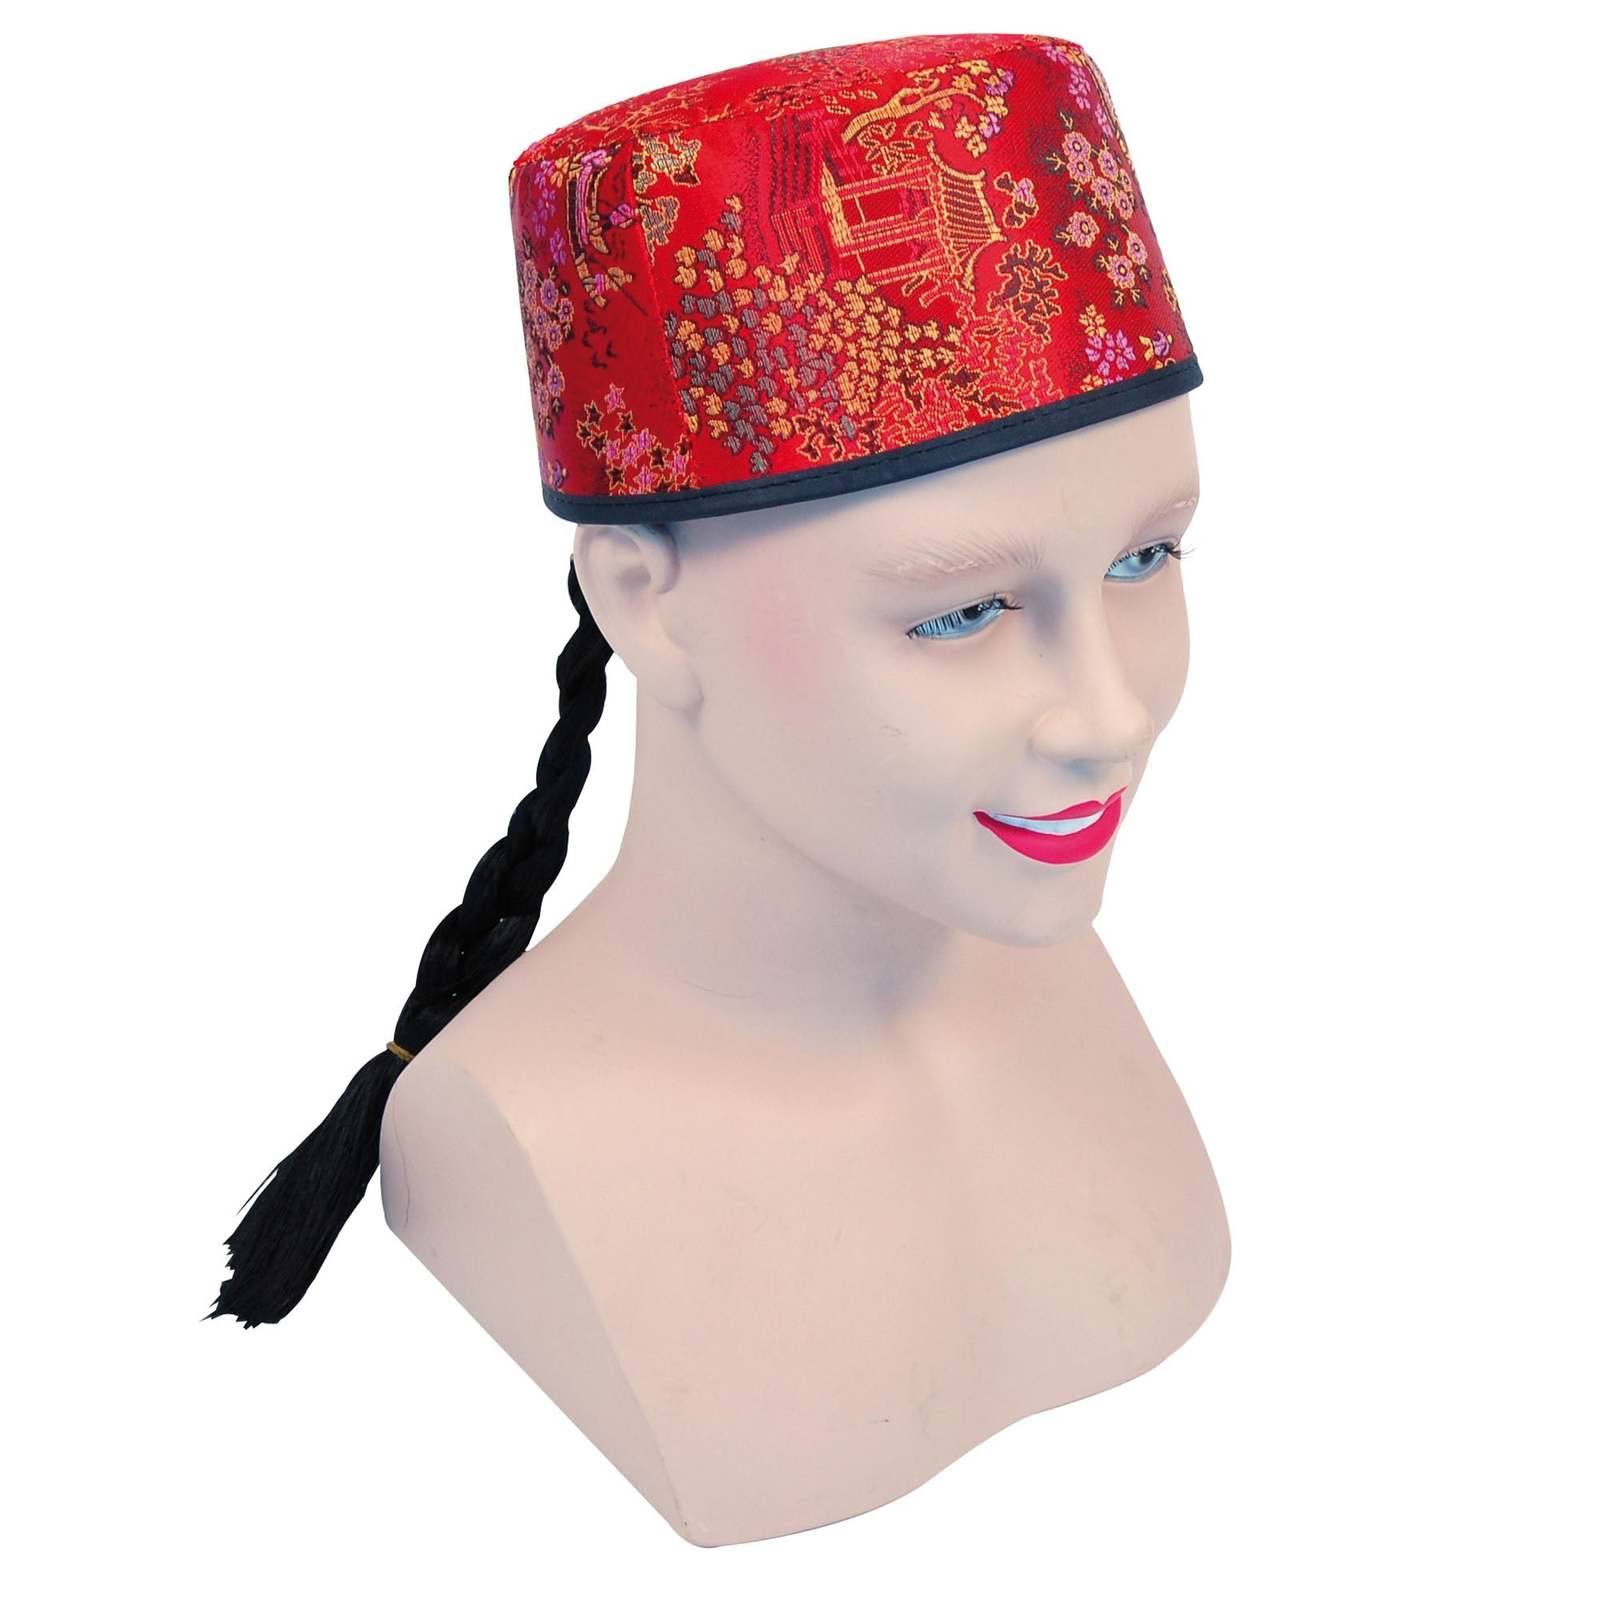 Primary image for Chinese Mandarin Hat Red Fabric+plait Hats Unisex One Size